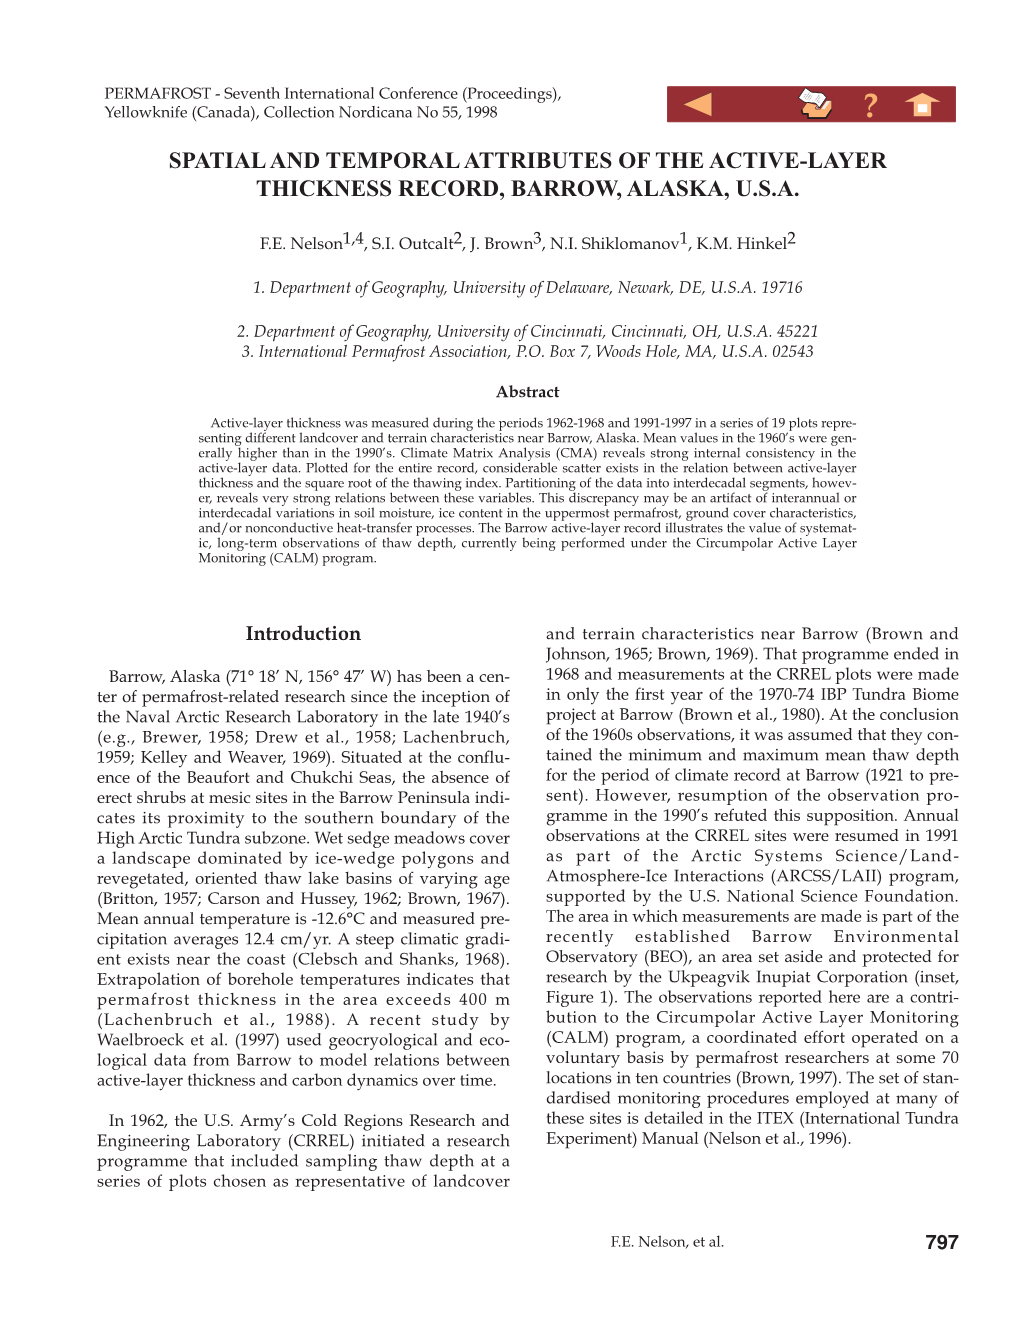 Spatial and Temporal Attributes of the Active-Layer Thickness Record, Barrow, Alaska, U.S.A